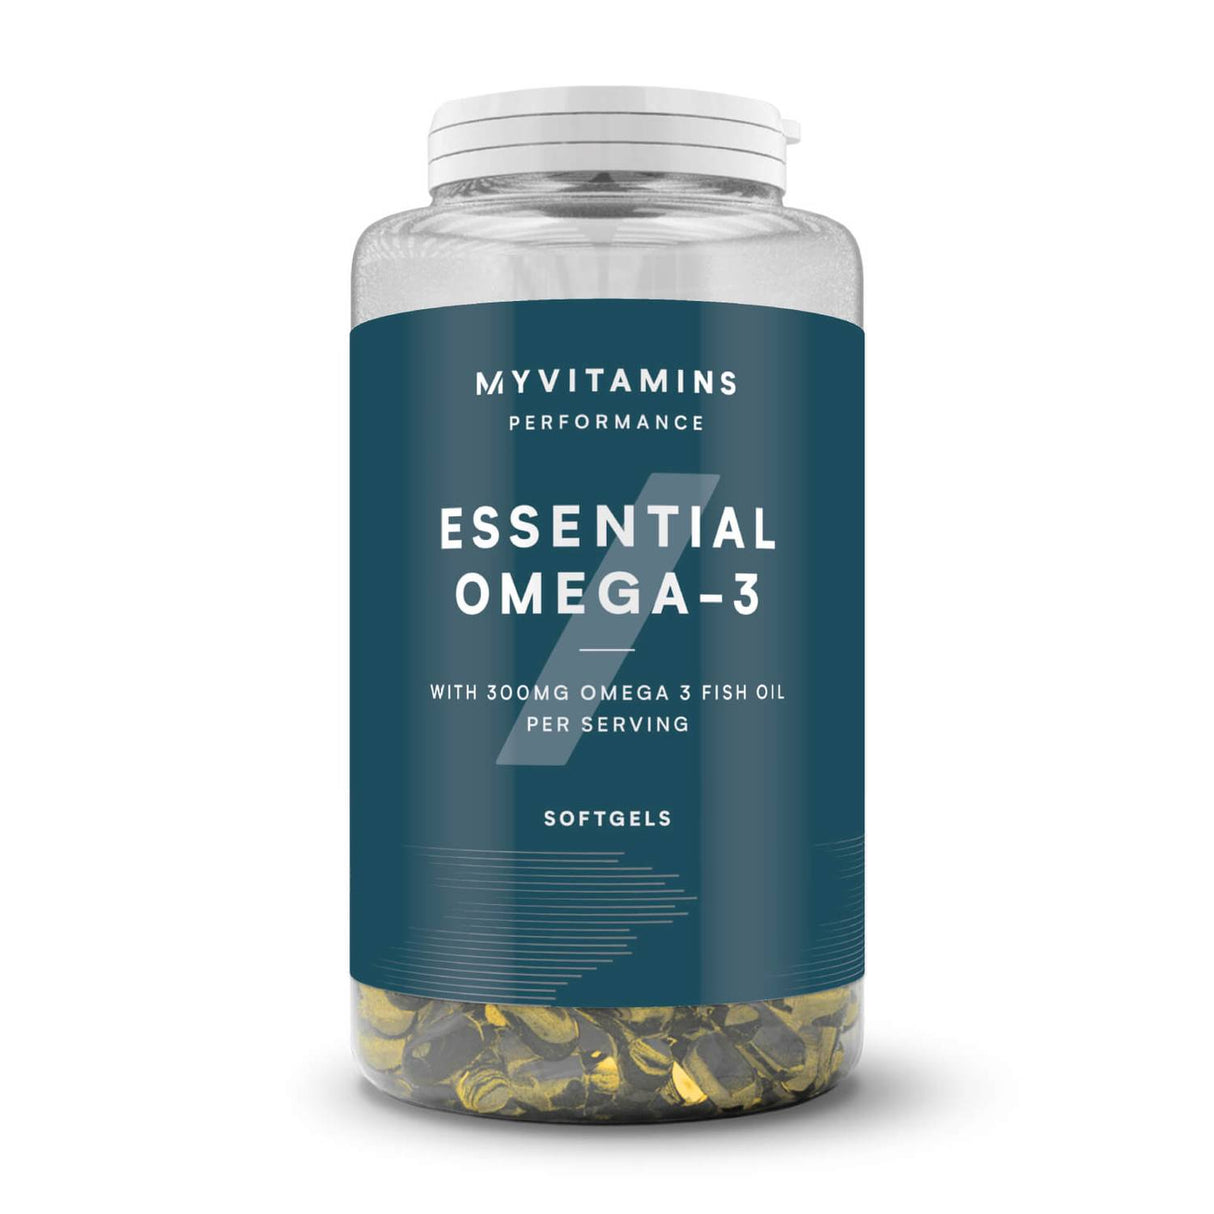 Myprotein Myvitamins Essential Omega 3 (300mg fish oil - 90/250 Capsules)